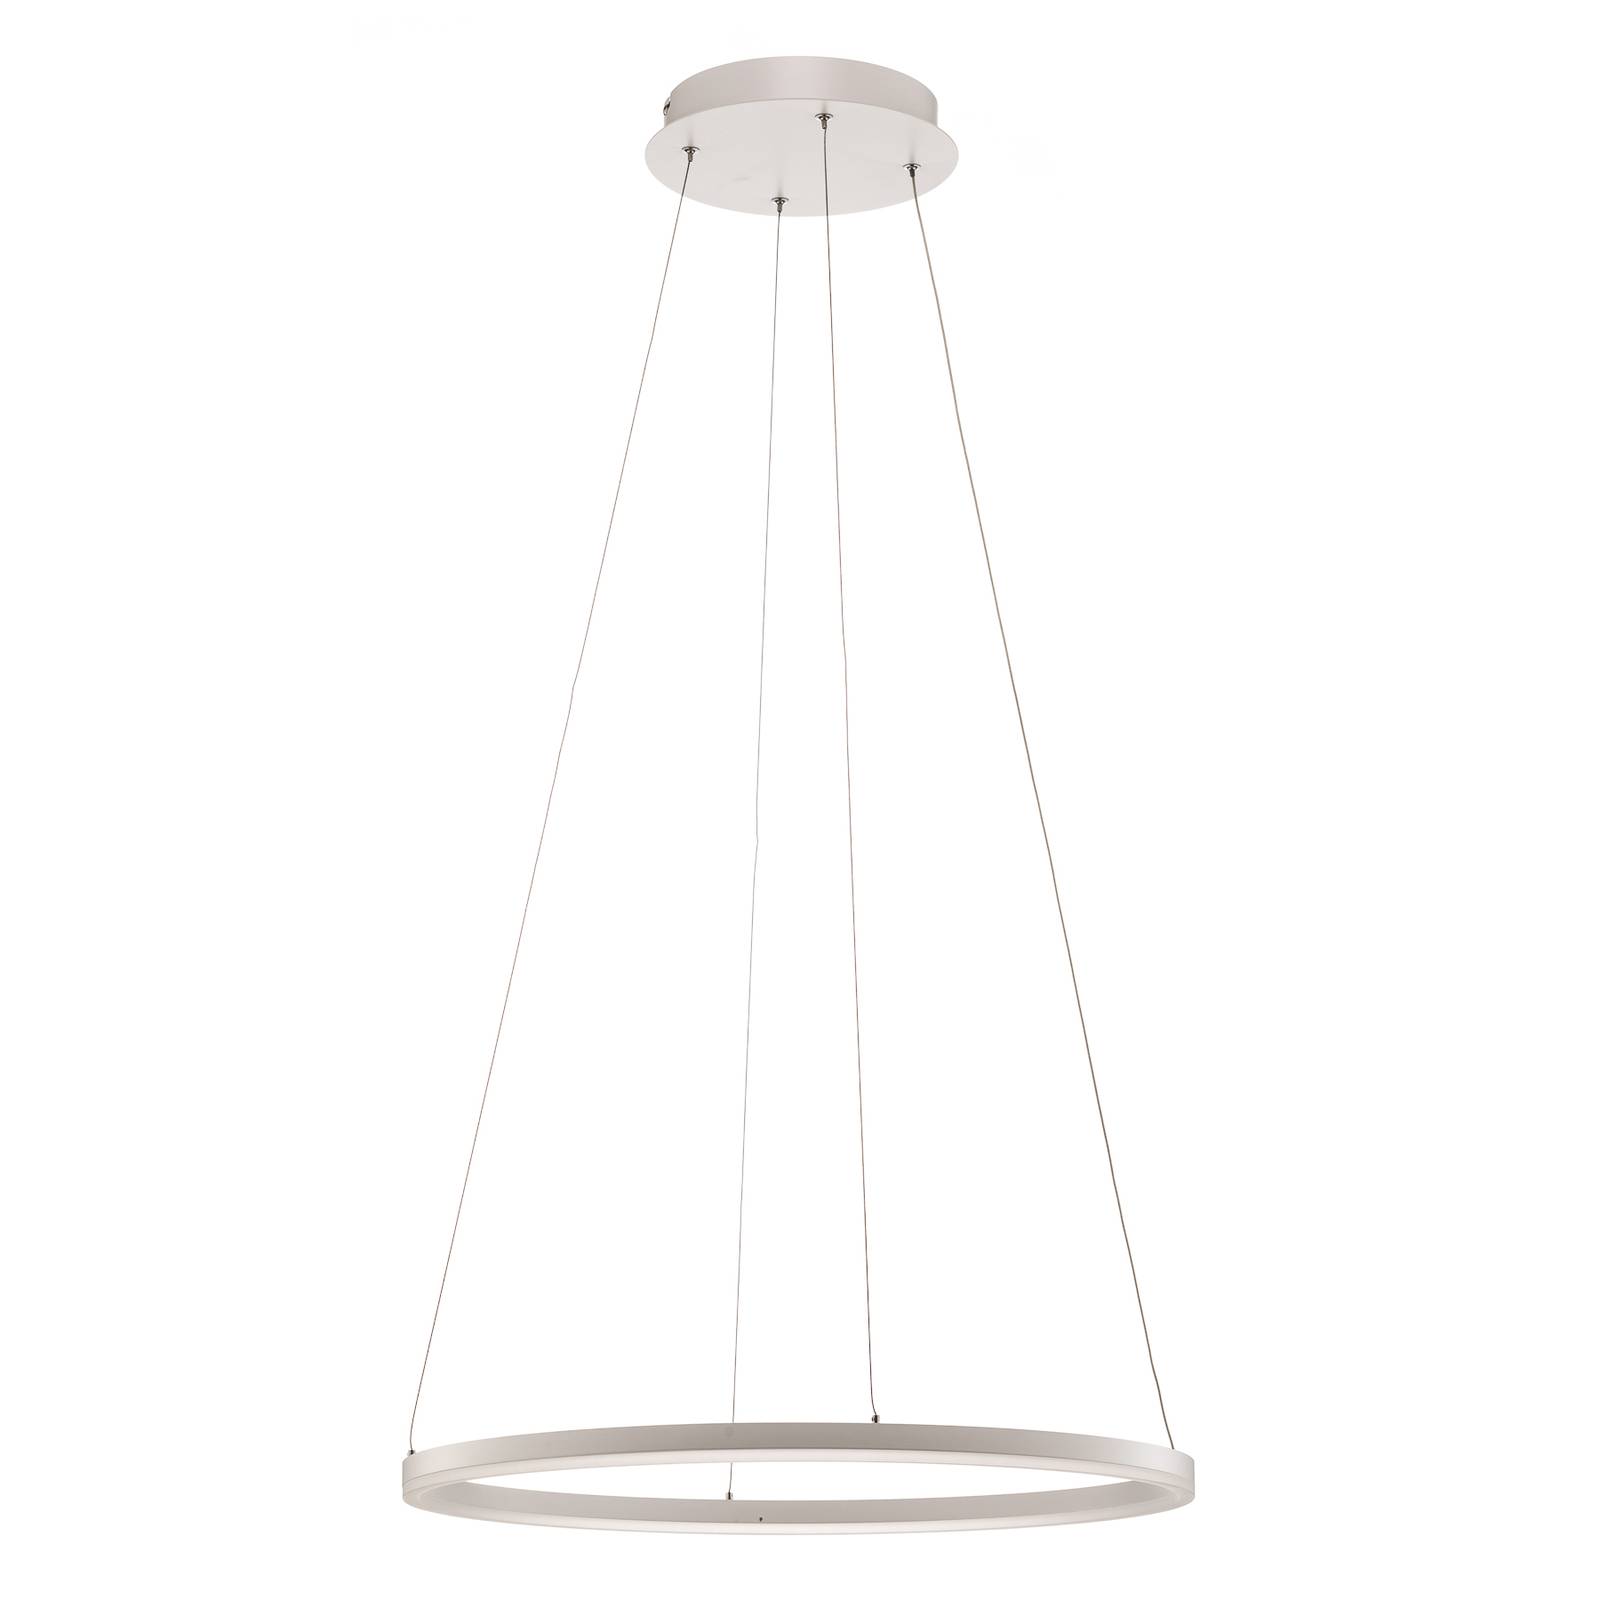 Fabas Luce LED-Pendelleuchte Giotto, einflammig, weiß